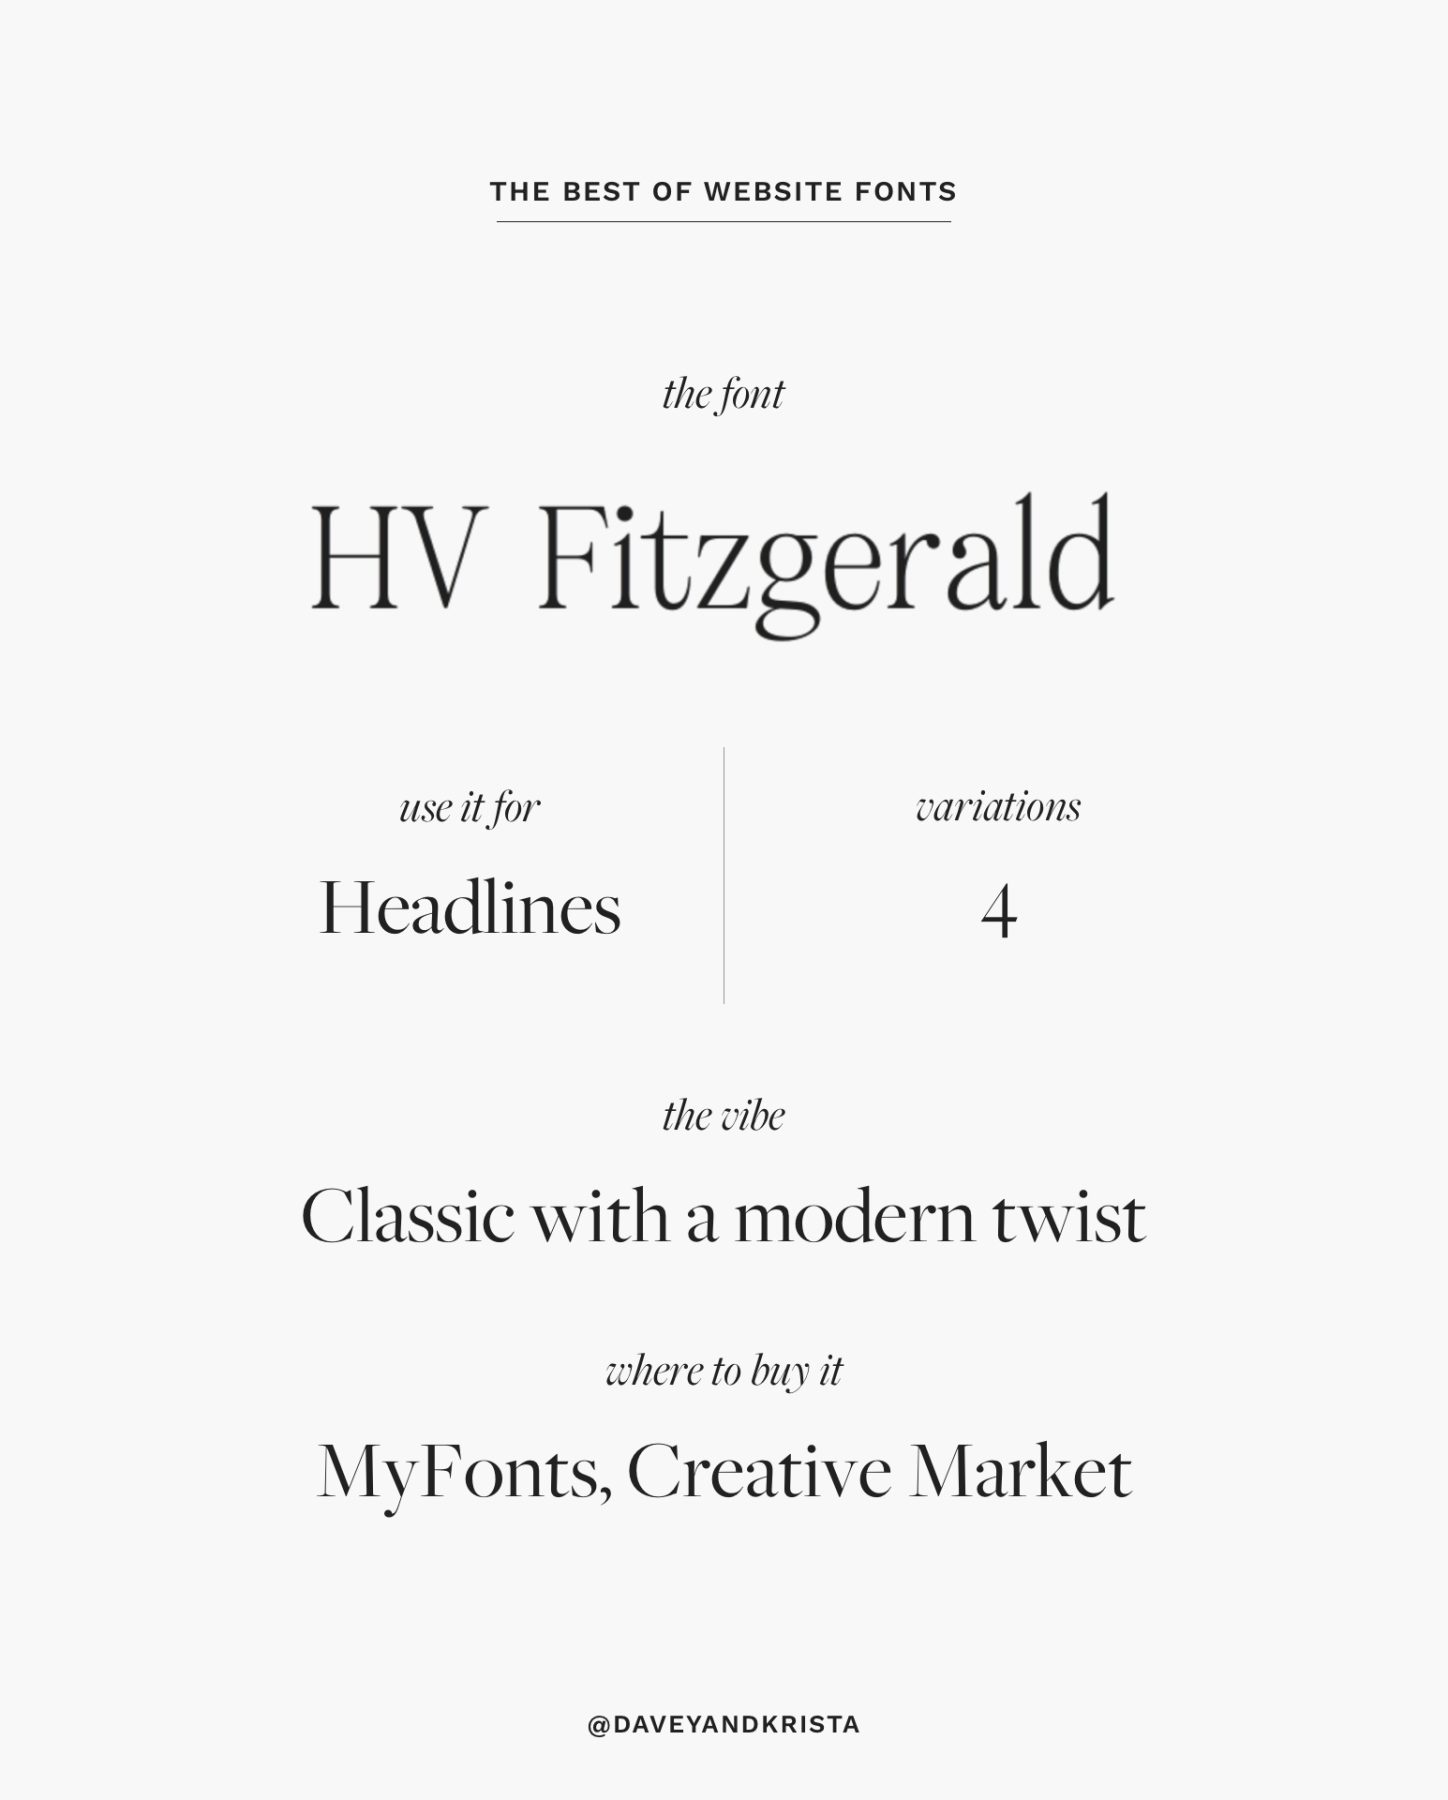 HV Fitzgerald - a thin, classic serif font for websites | The Best Fonts for Websites